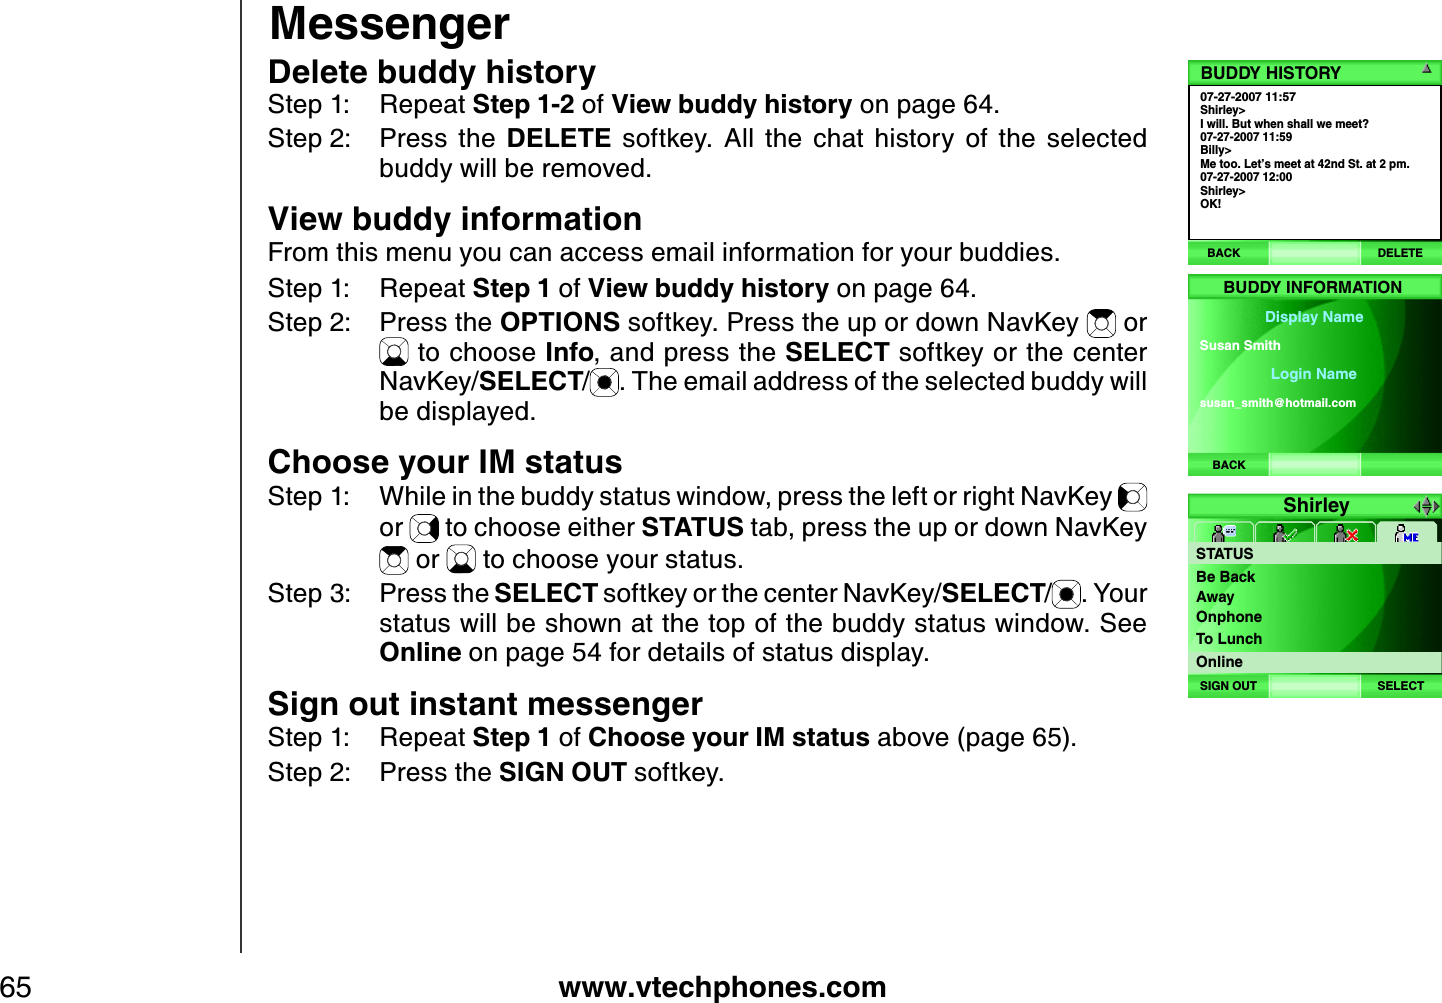 www.vtechphones.com65Delete buddy historyStep 1: Repeat Step 1-2 of View buddy history on page 64.Step 2: Press  the  DELETE  softkey.  All  the  chat  history  of  the  selected buddy will be removed. View buddy informationFrom this menu you can access email information for your buddies.Step 1: Repeat Step 1 of View buddy history on page 64.Step 2: Press the OPTIONS softkey. Press the up or down NavKey   or  to choose Info, and press the SELECT softkey or the center NavKey/SELECT/. The email address of the selected buddy will be displayed.Choose your IM statusStep 1: While in the buddy status window, press the left or right NavKey or   to choose either STATUS tab, press the up or down NavKey  or   to choose your status. Step 3: Press the SELECT softkey or the center NavKey/SELECT/. Your status will be shown at the top of the buddy status window. See Online on page 54 for details of status display.Sign out instant messengerStep 1: Repeat Step 1 of Choose your IM status above (page 65).Step 2: Press the SIGN OUT softkey. Messenger07-27-2007 11:57Shirley&gt;I will. But when shall we meet?07-27-2007 11:59Billy&gt;Me too. Let’s meet at 42nd St. at 2 pm.07-27-2007 12:00Shirley&gt;OK!BUDDY HISTORYBACK DELETEBACKBUDDY INFORMATIONDisplay NameLogin NameSusan Smith susan_ smith@ hotmail.comShirleySTATUSSELECTSIGN OUTBe BackAwayOnphoneTo LunchOnline